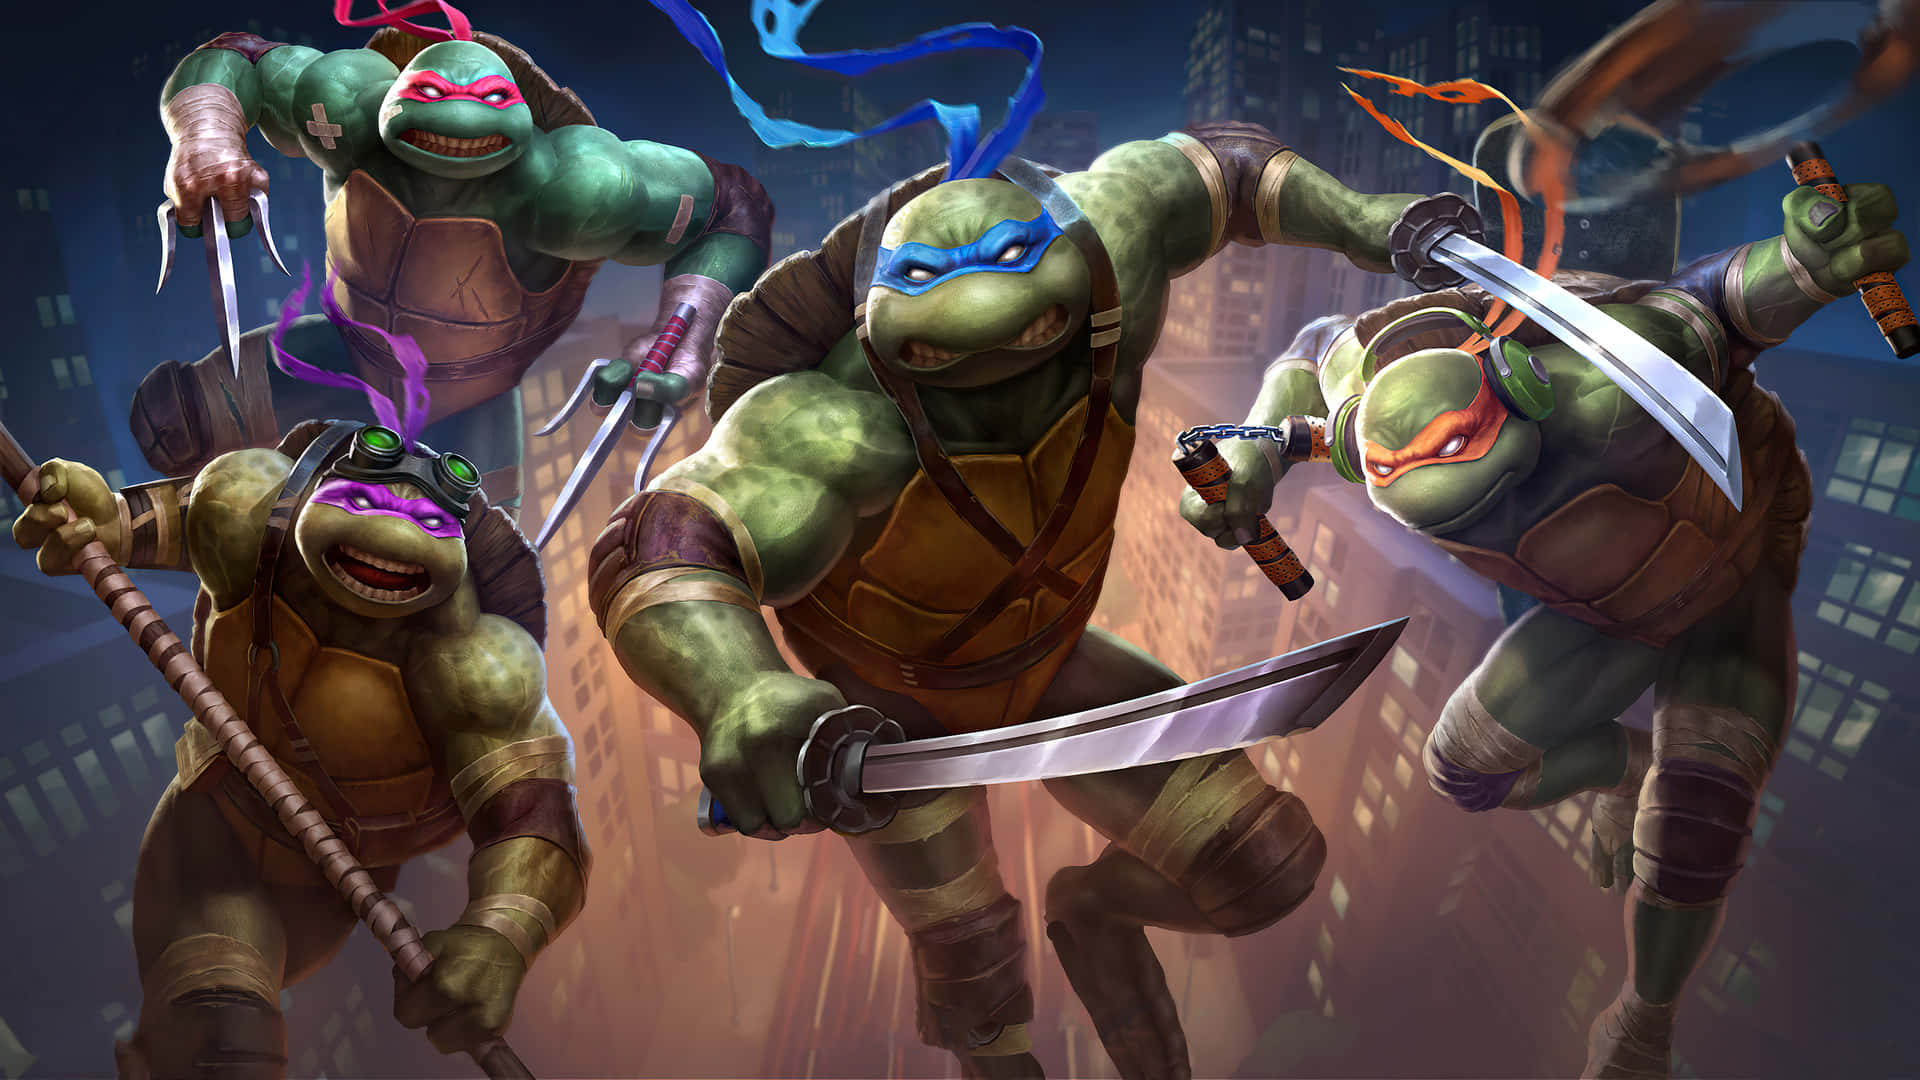 Get ready to fight evil with the Teenage Mutant Ninja Turtles!